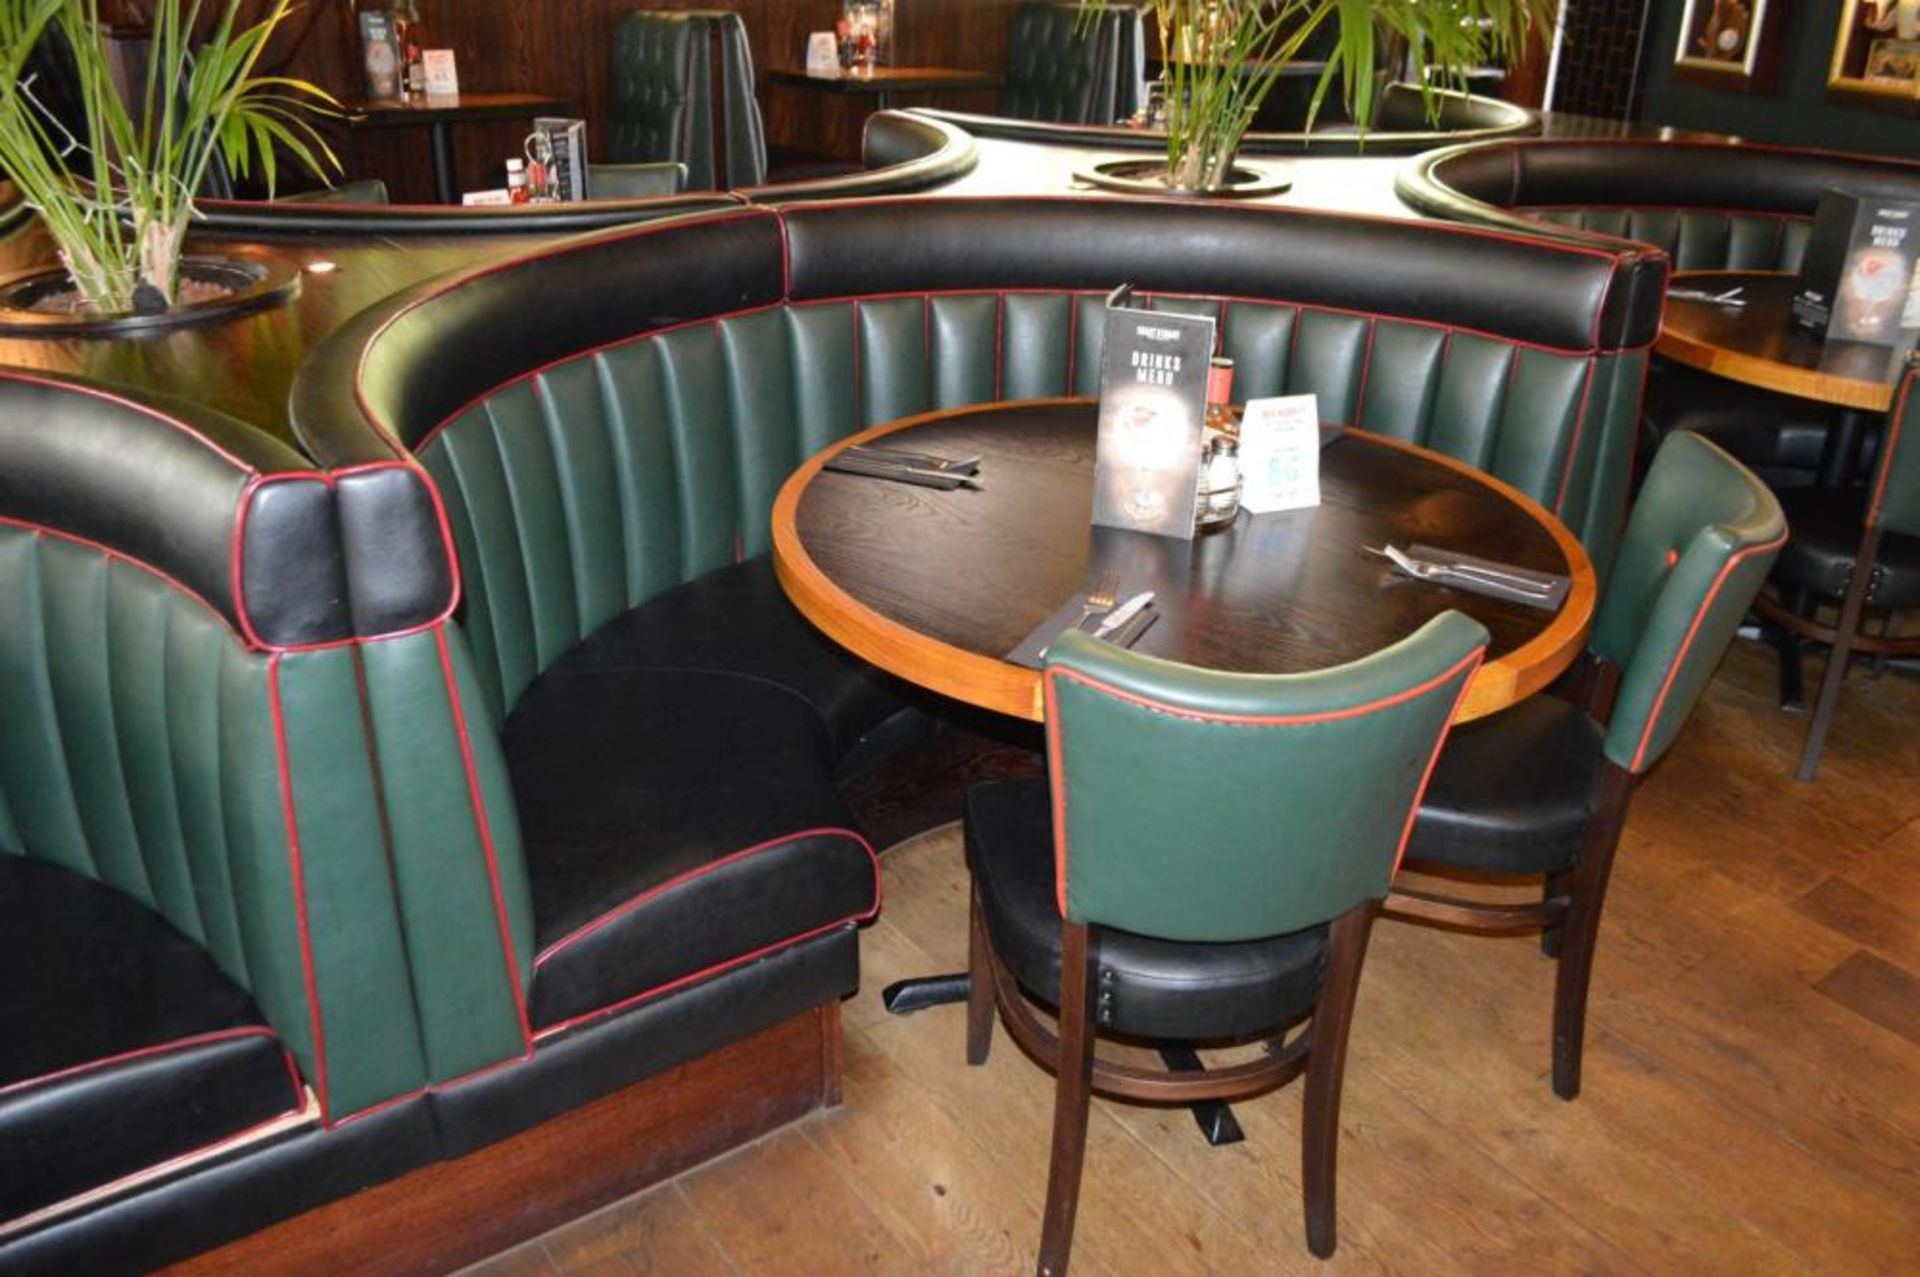 1 x Contemporary Half Circle Seating Booth - Features a Leather Upholstery in Green and Black, - Image 3 of 5